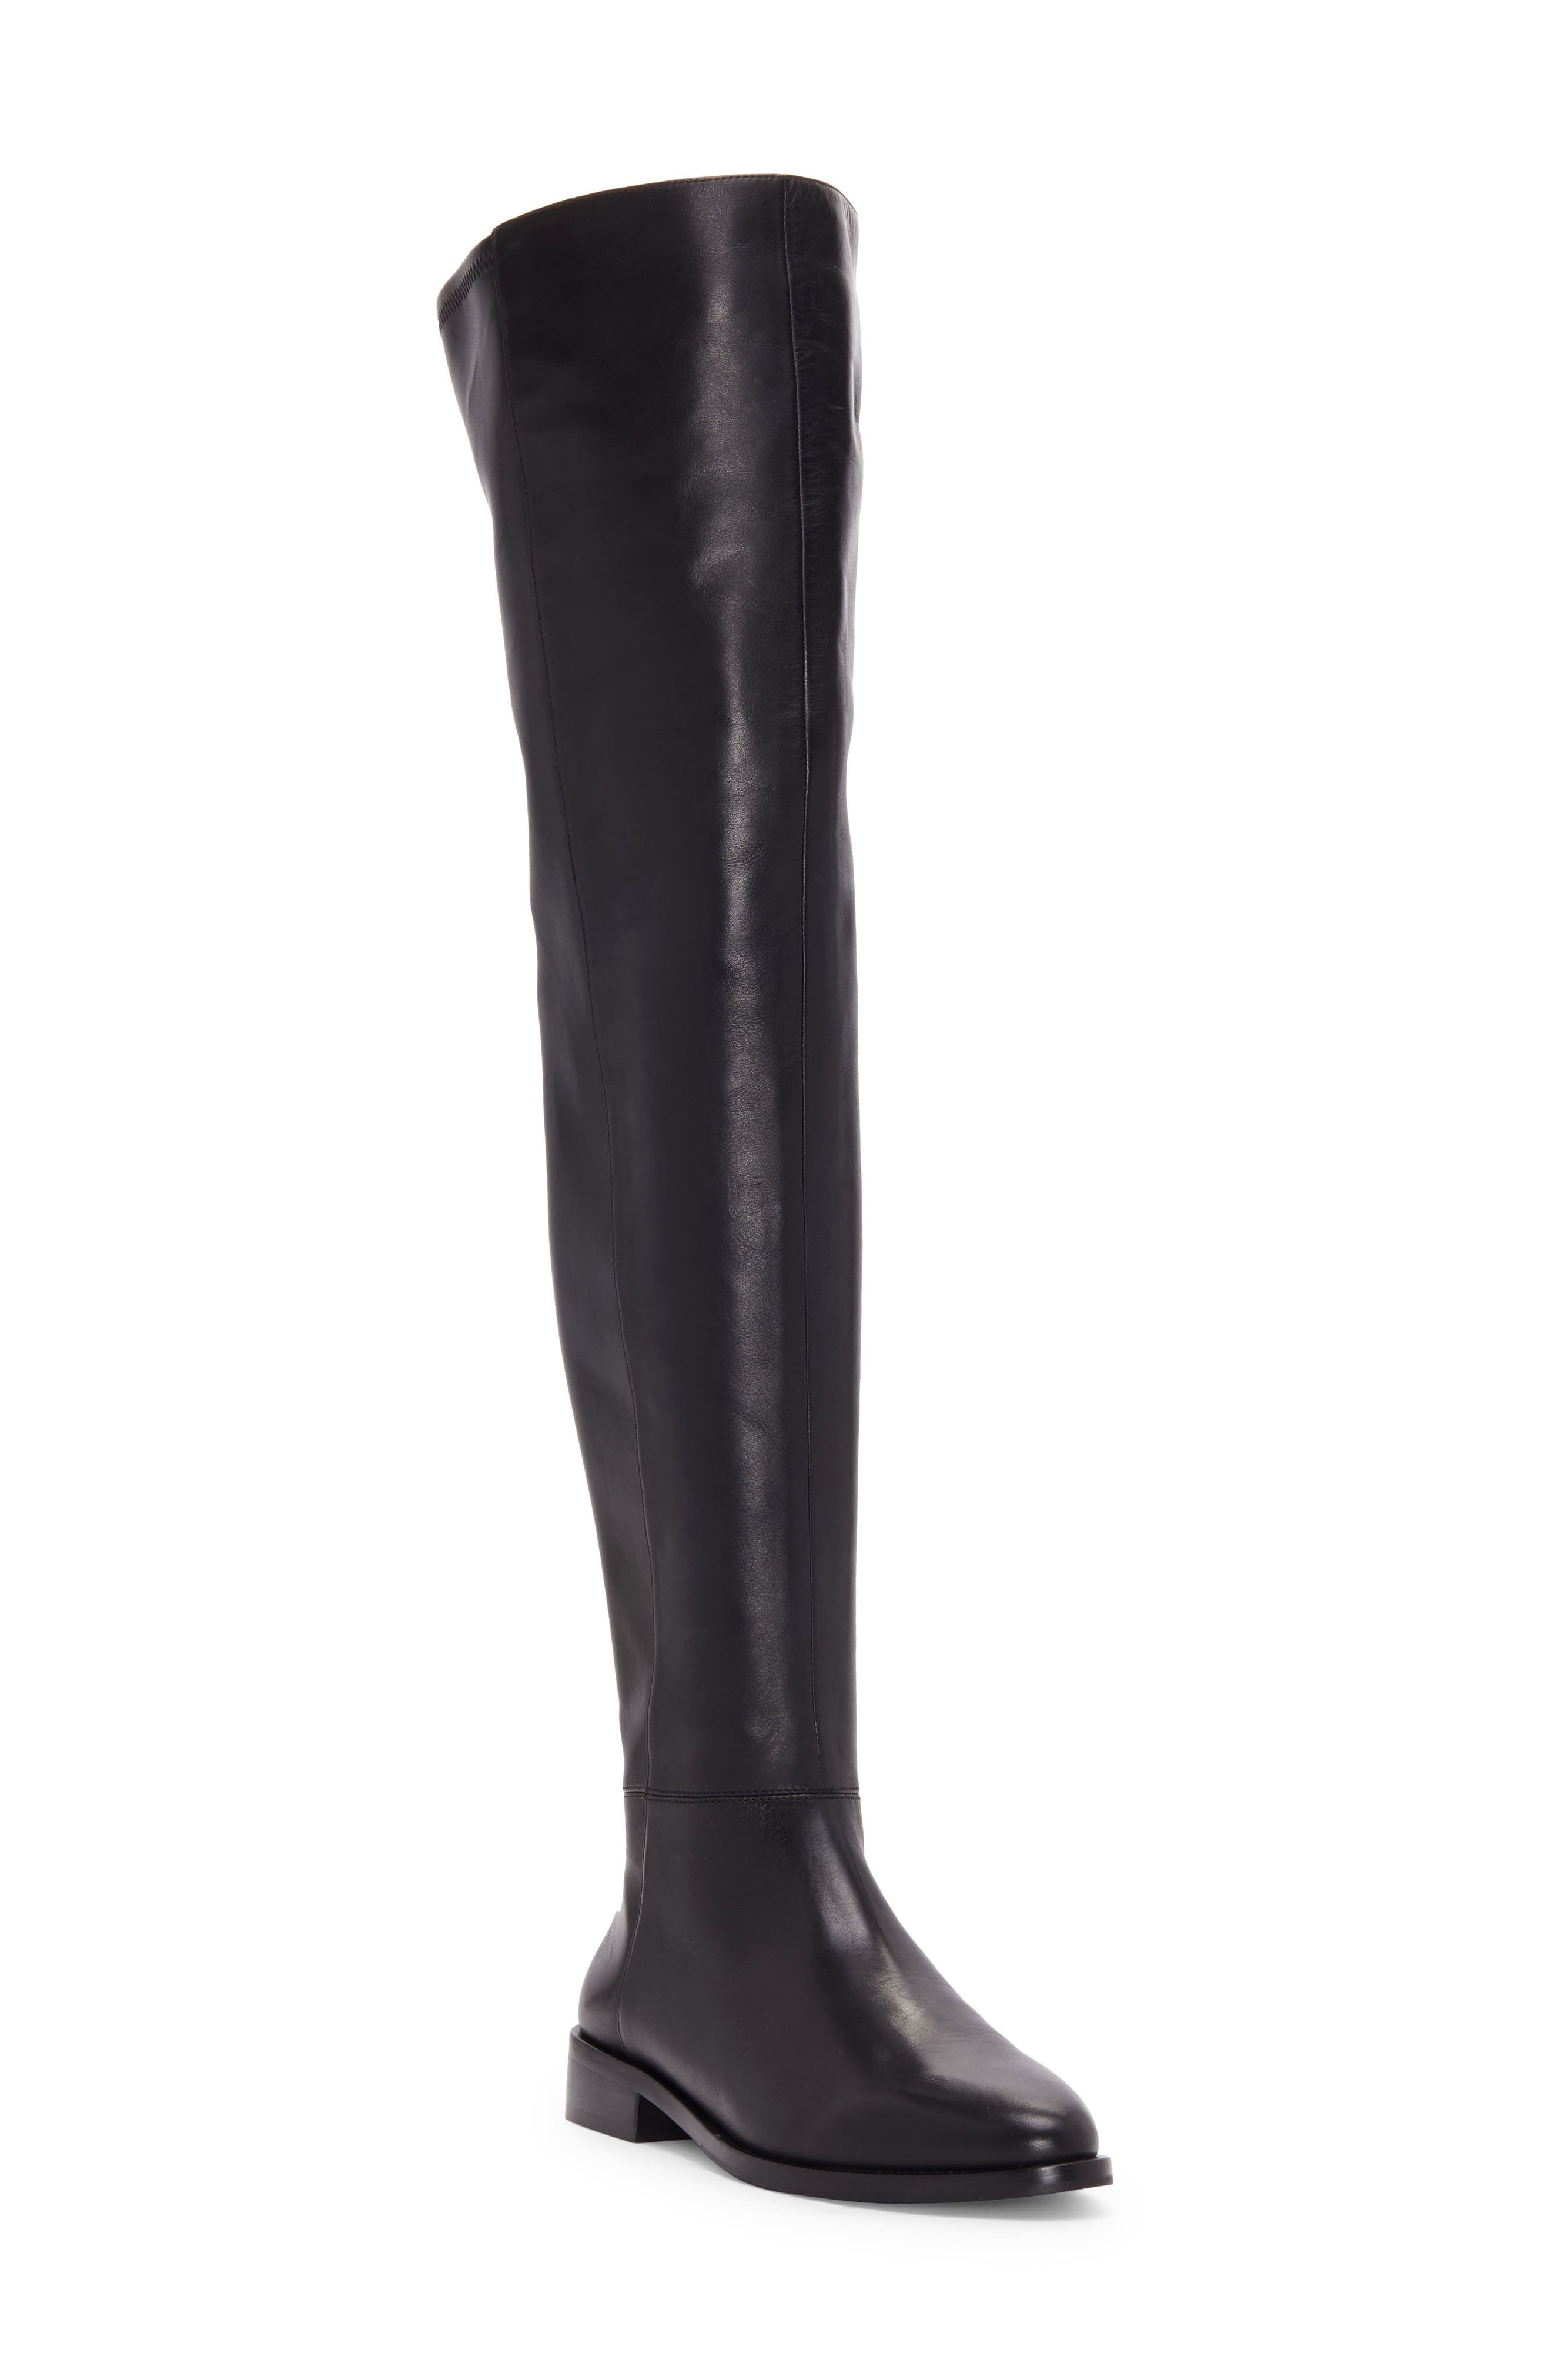 vince camuto black leather boots